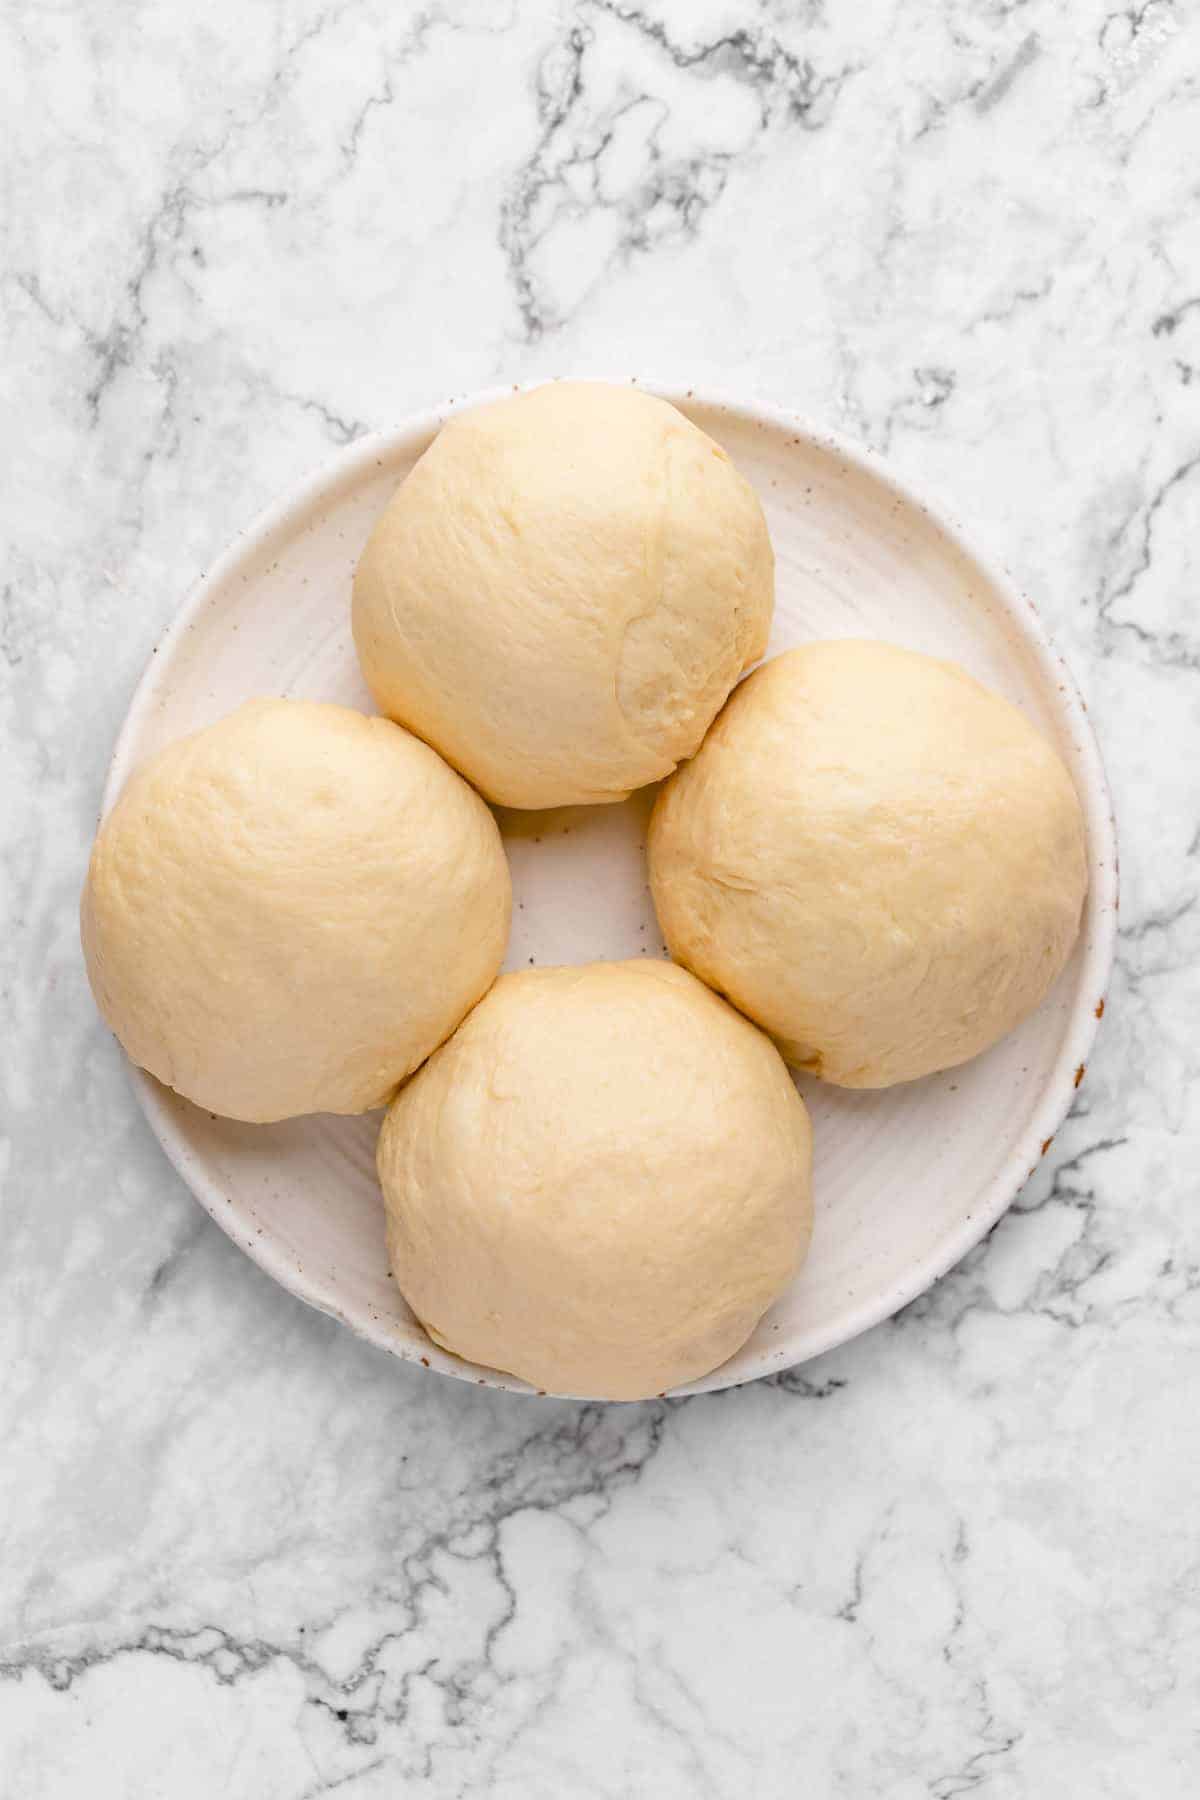 4 balls of Japanese milk bread dough on a plate before baking